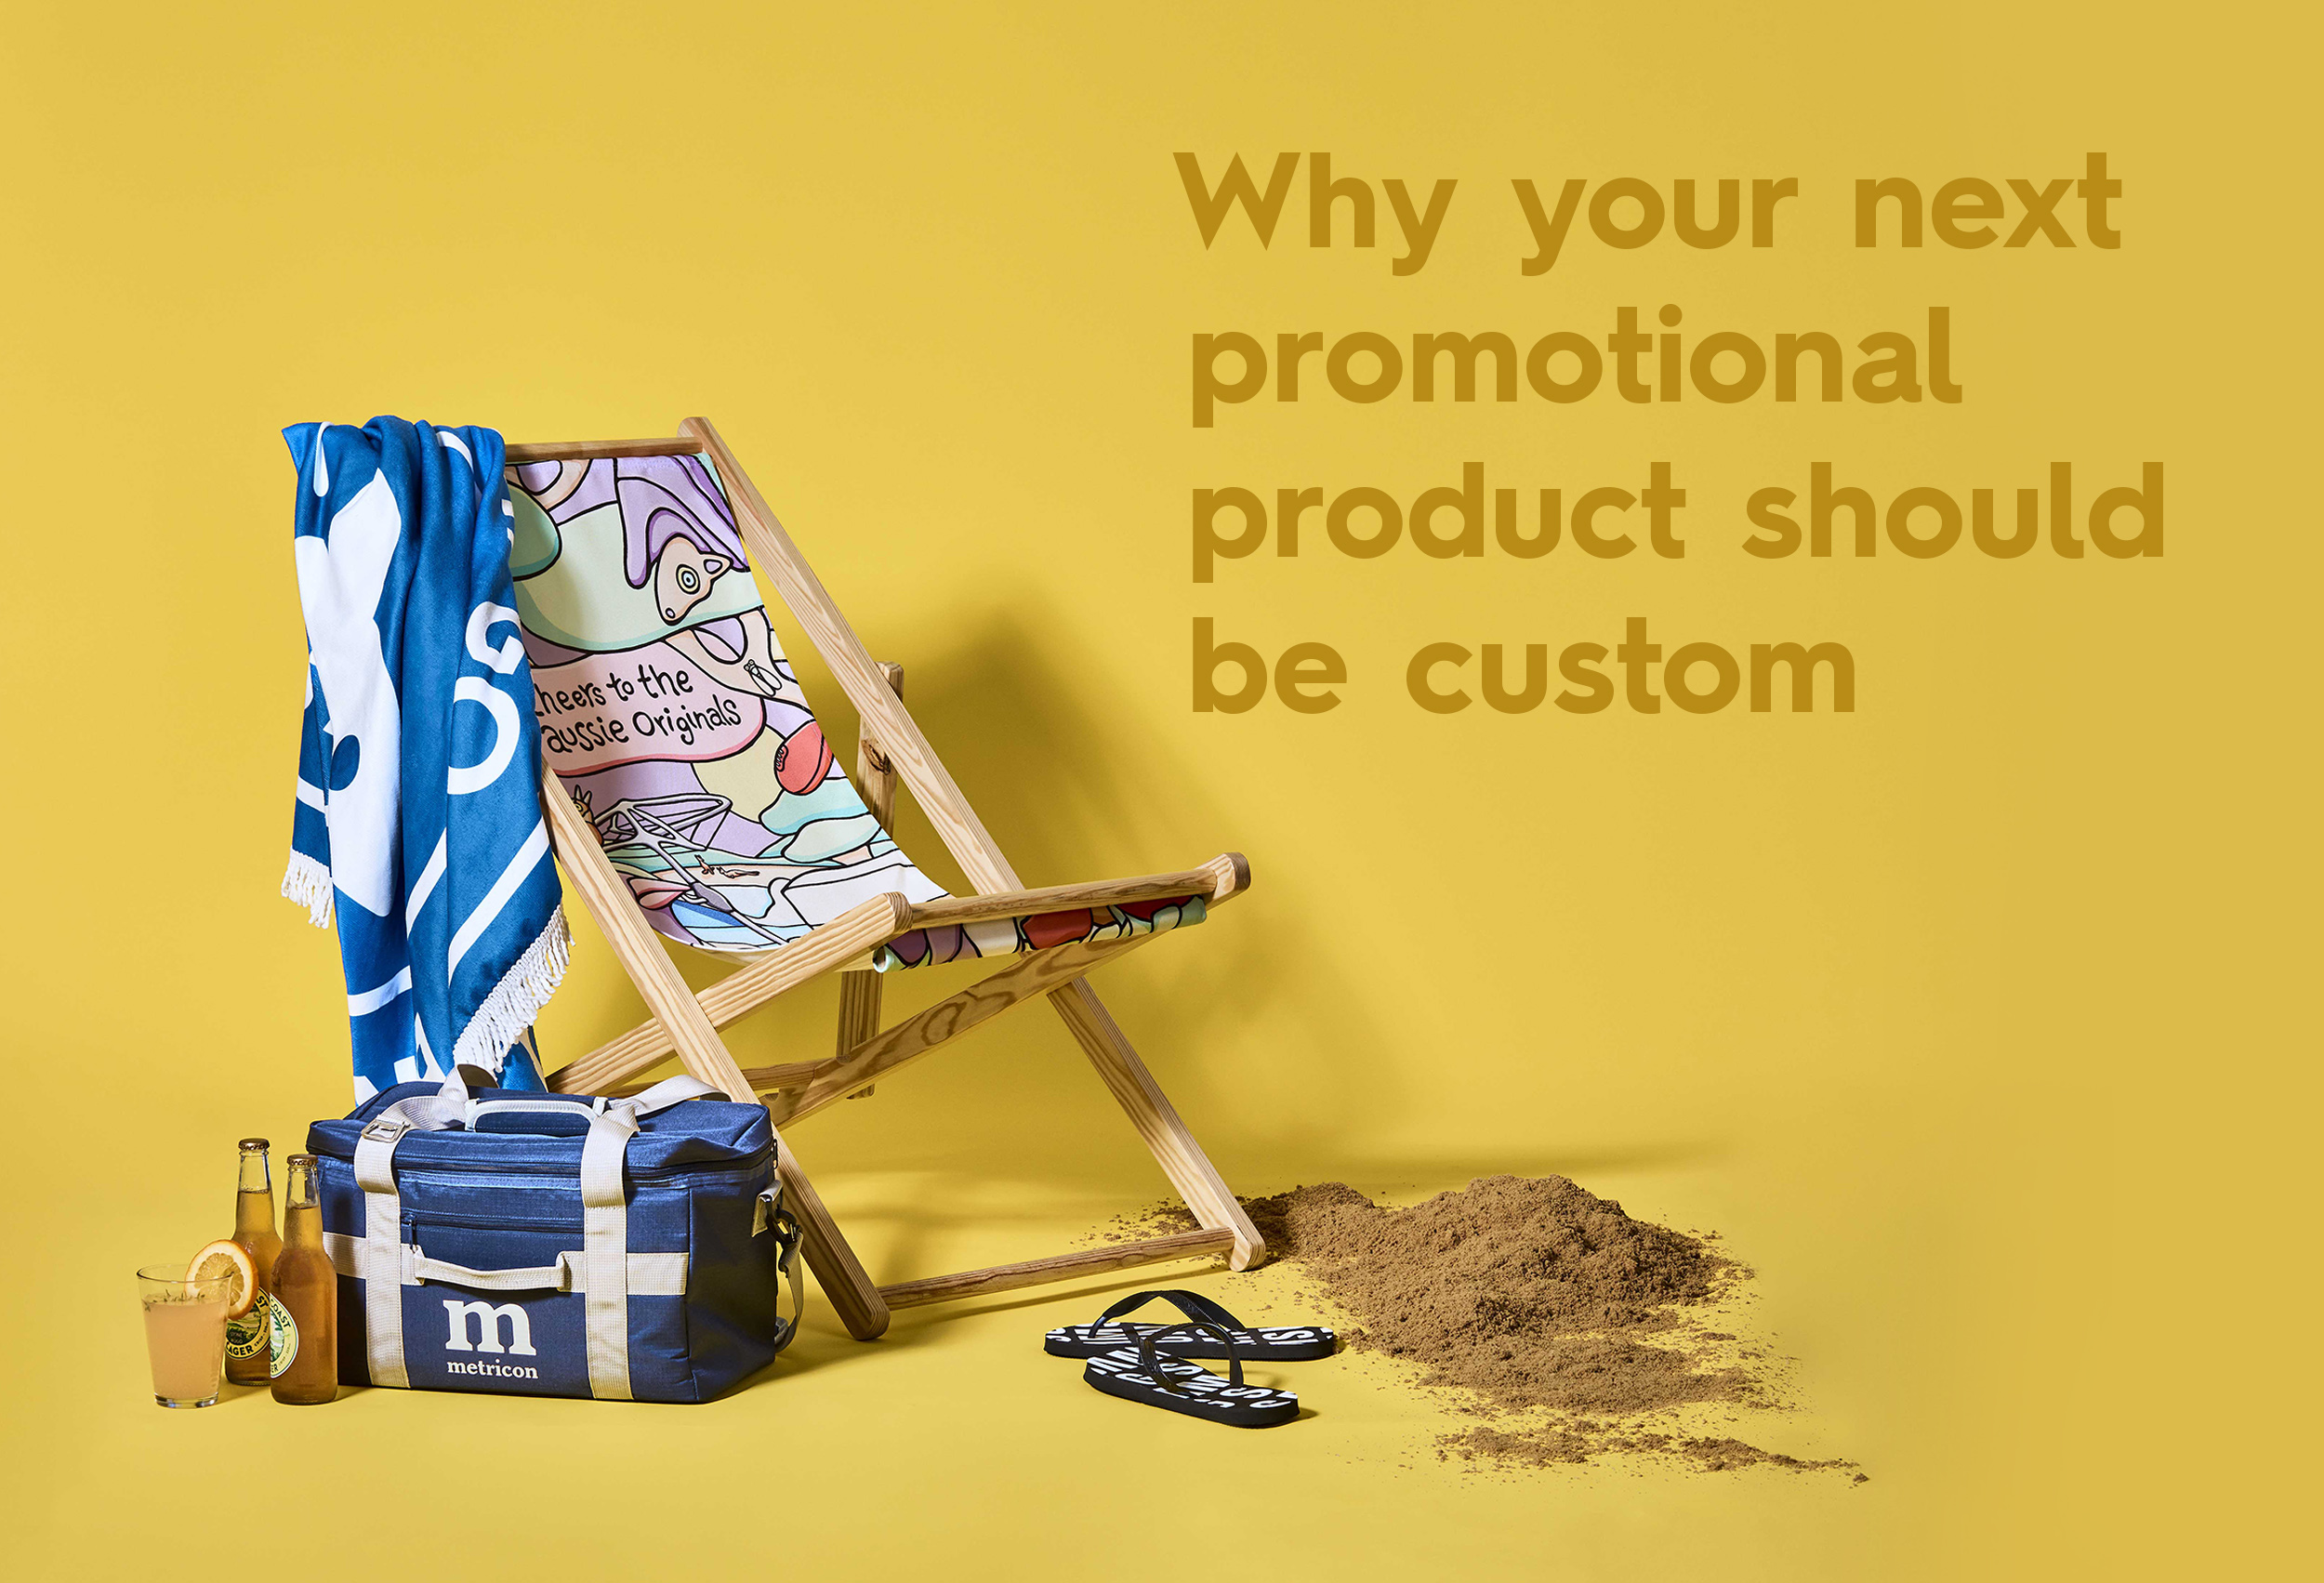 Understand the difference between stock and custom merchandise [and why custom is the way to go]